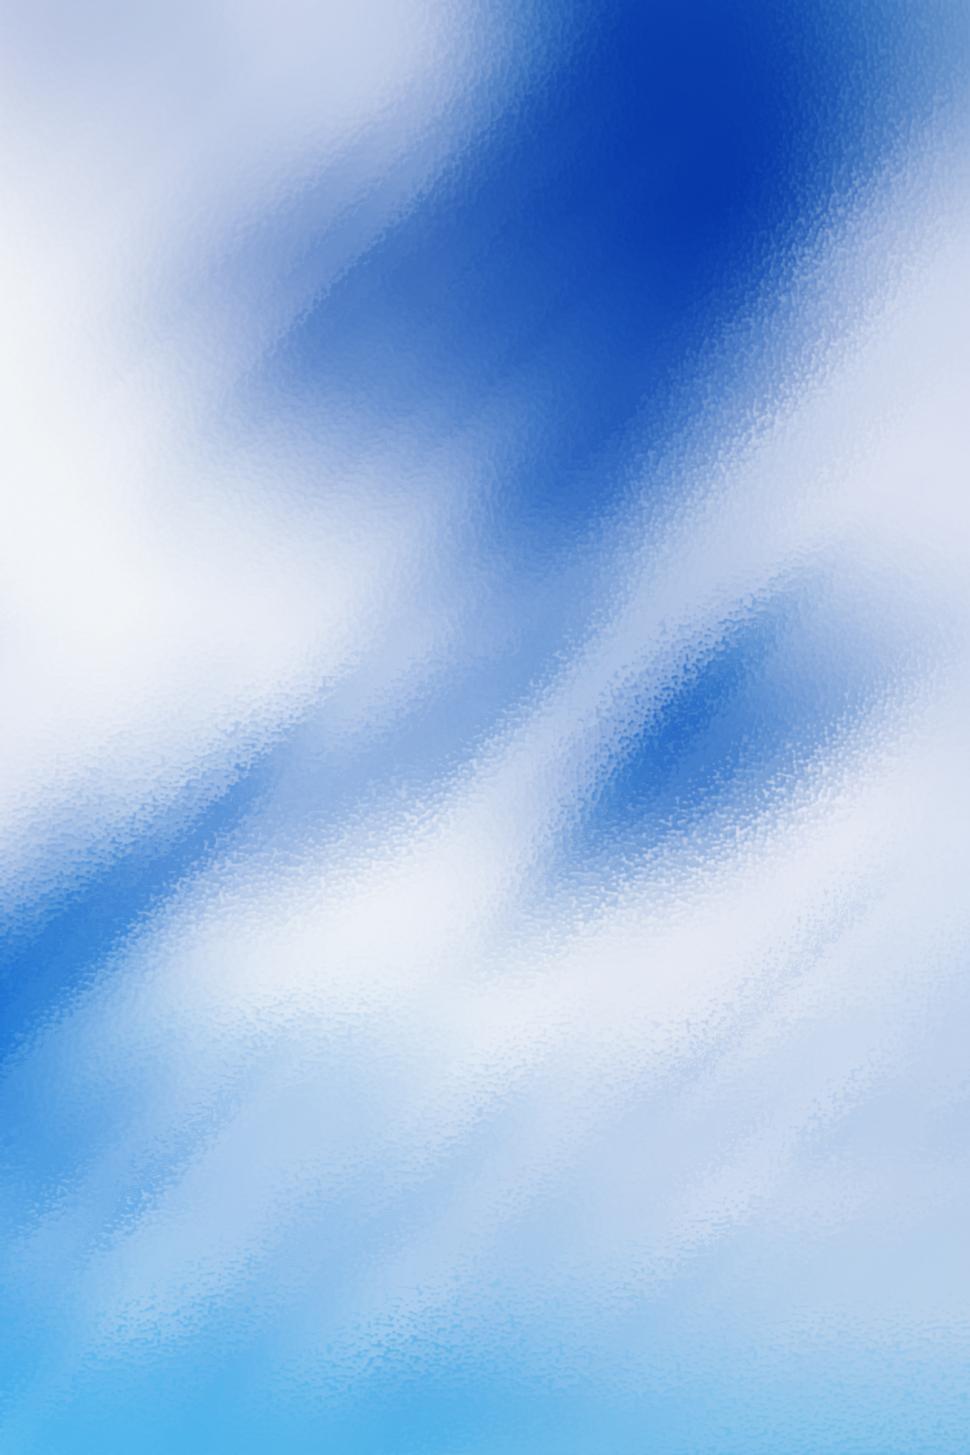 Free Image of Backgrounds 